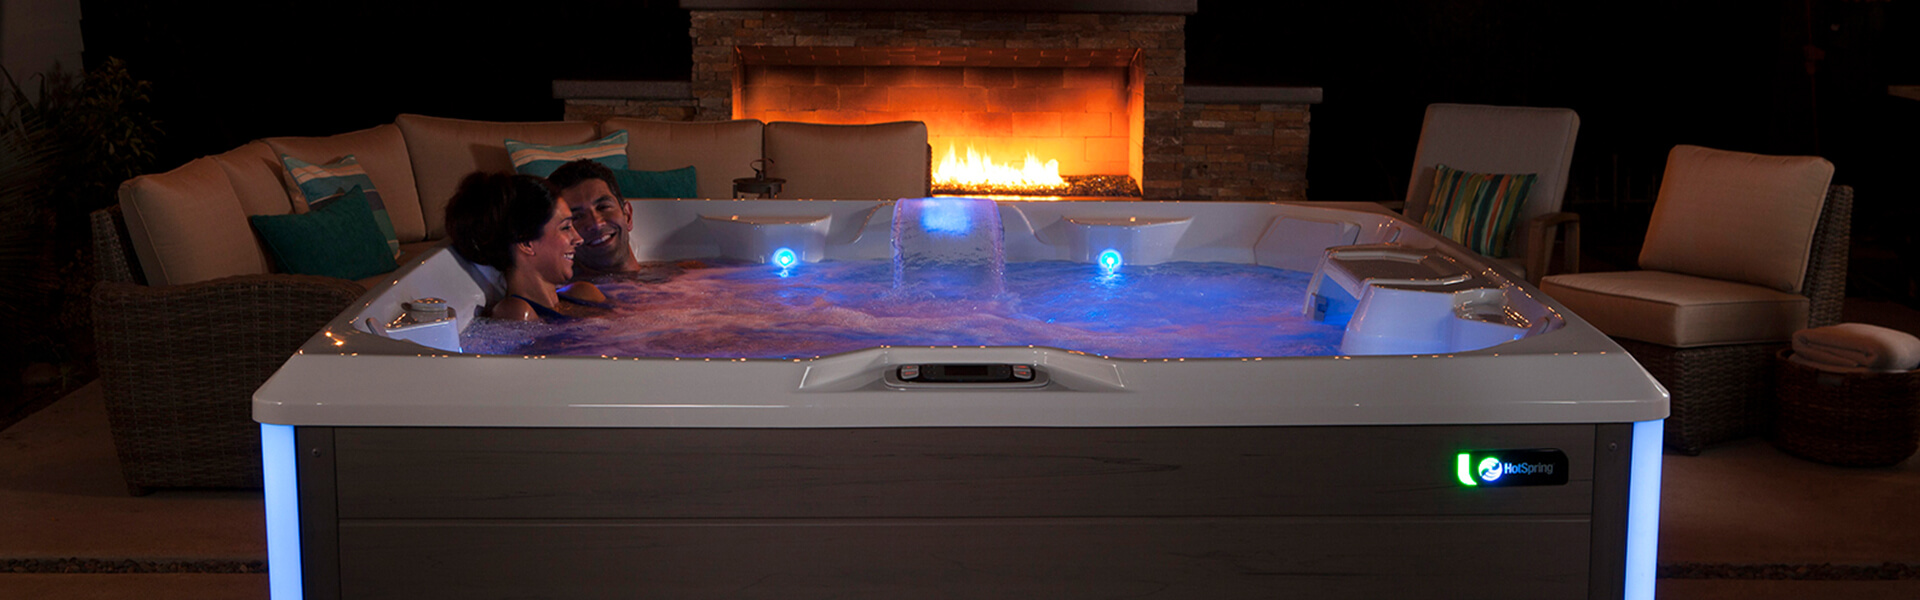 1920x500 Hot Spring Limelight Pulse Hot Tub Jj Pool And Spa